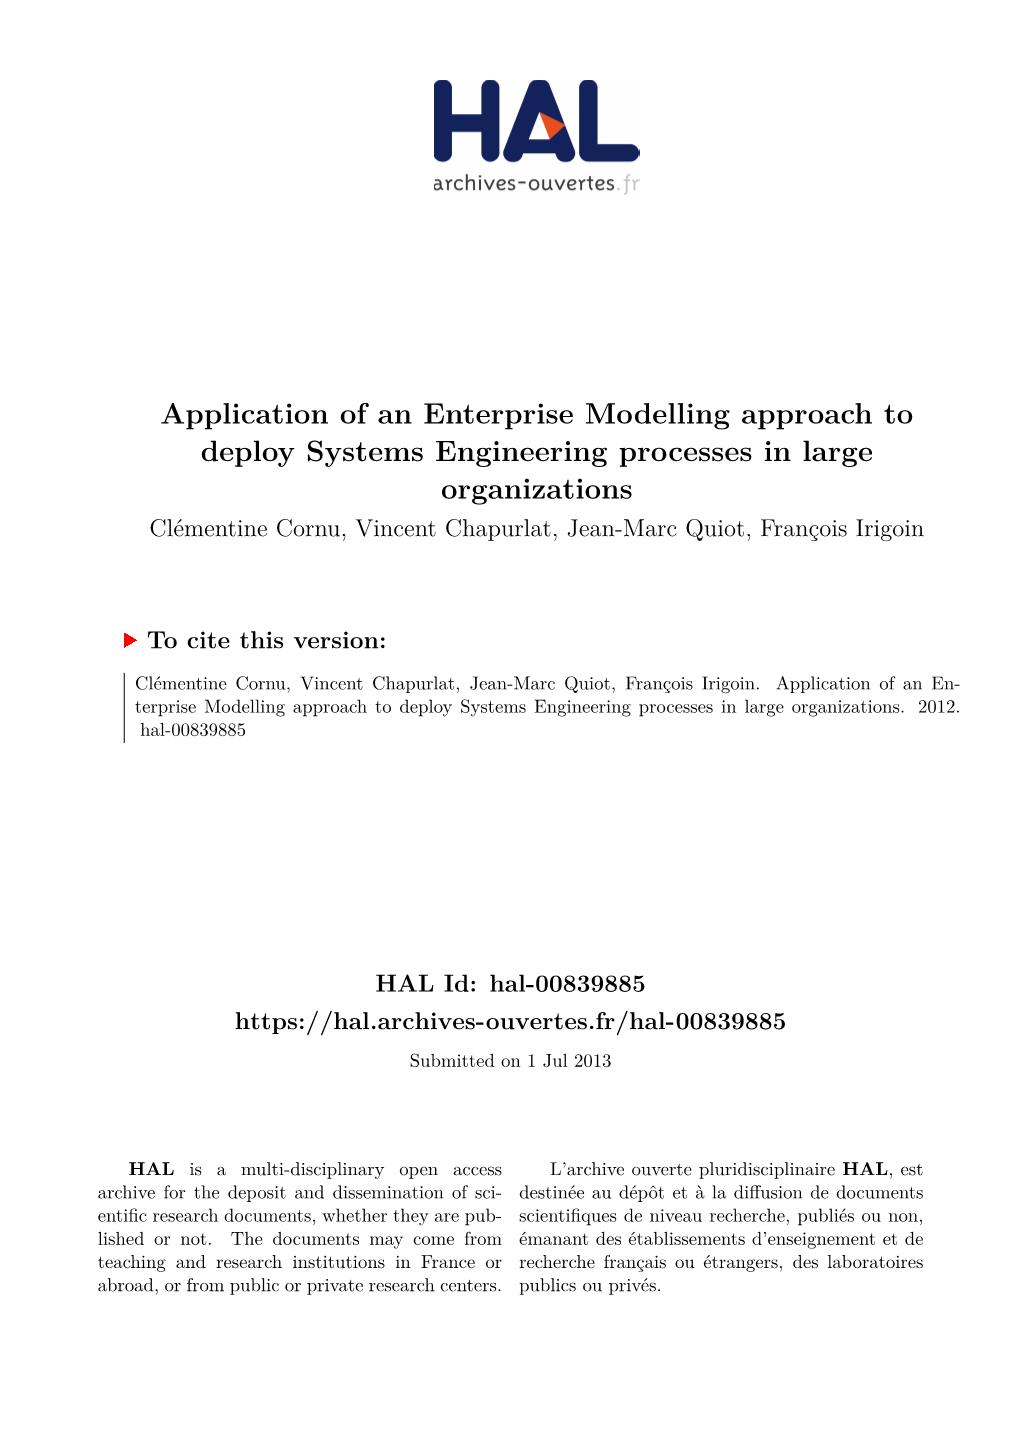 Application of an Enterprise Modelling Approach to Deploy Systems